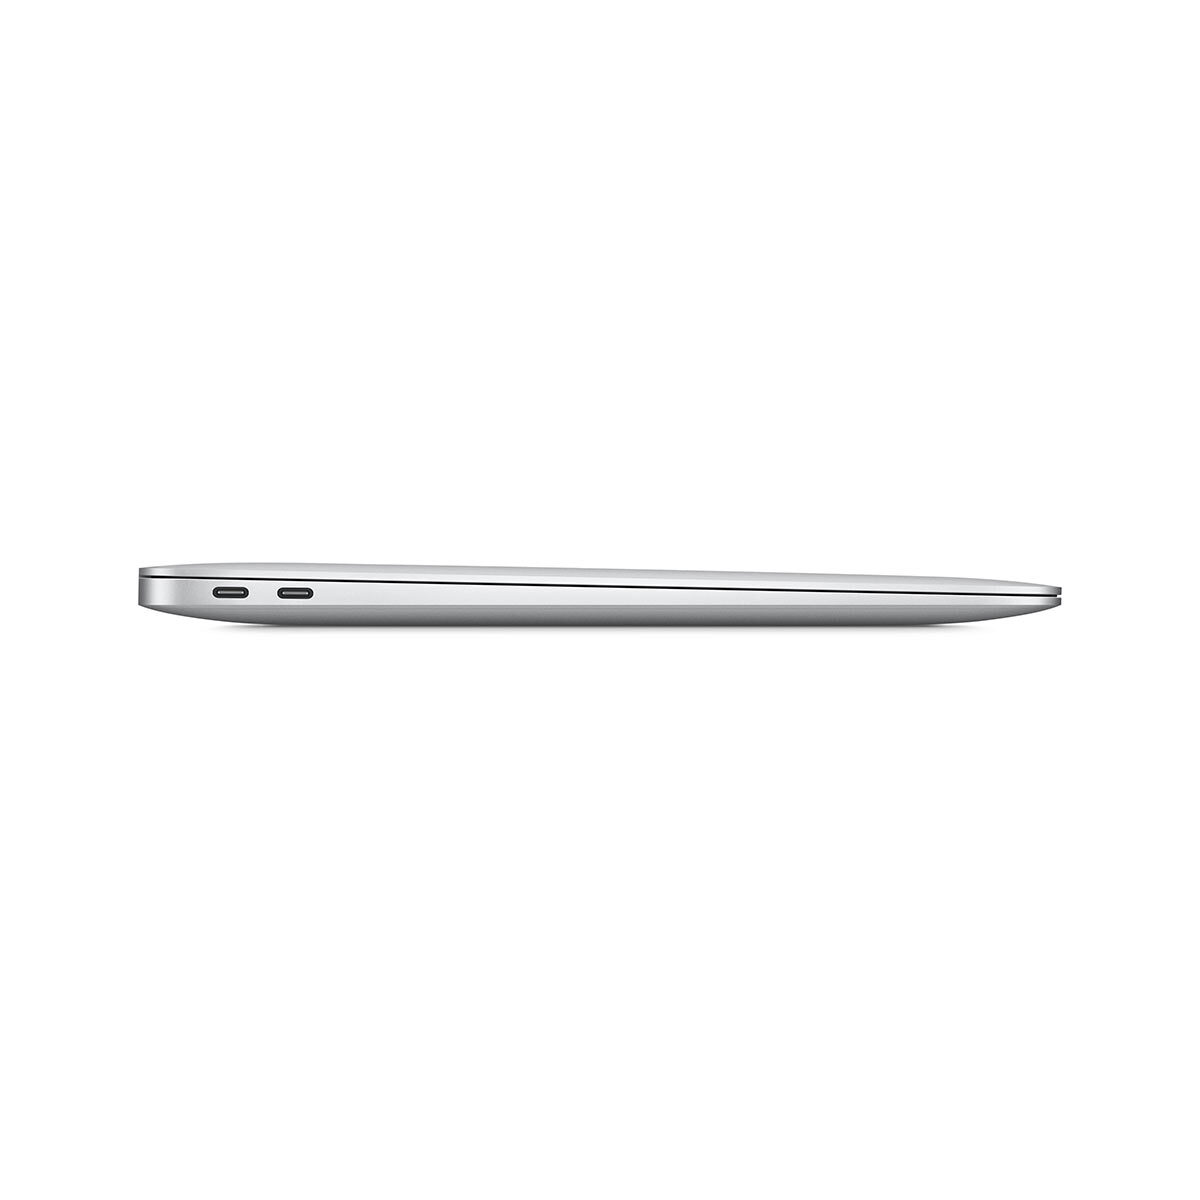 Buy Apple MacBook Air 2020, Apple M1 Chip, 16GB RAM, 1TB SSD, 13.3 Inch in Silver, Z1282000780082 at costco.co.uk